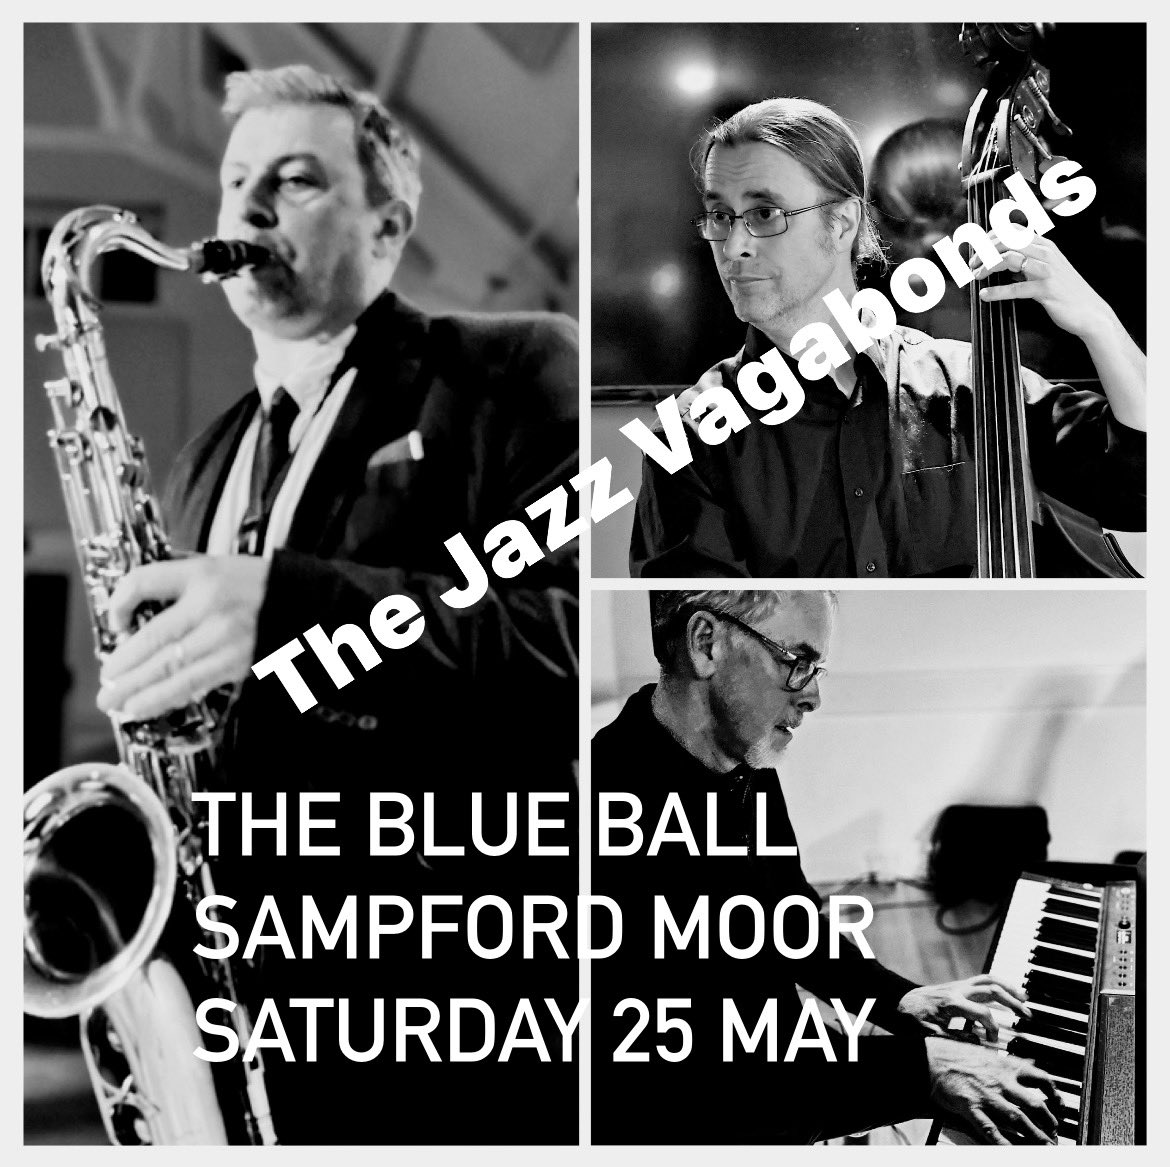 In complete non-election news I’m delighted to say we’ll be playing at The Blue Ball near Wellington on Saturday 25 May - top quality food, drink and of course music! Call 01823 660857 or email hello@theblueballsmapford.co.uk to reserve #jazz #swing #Somerset